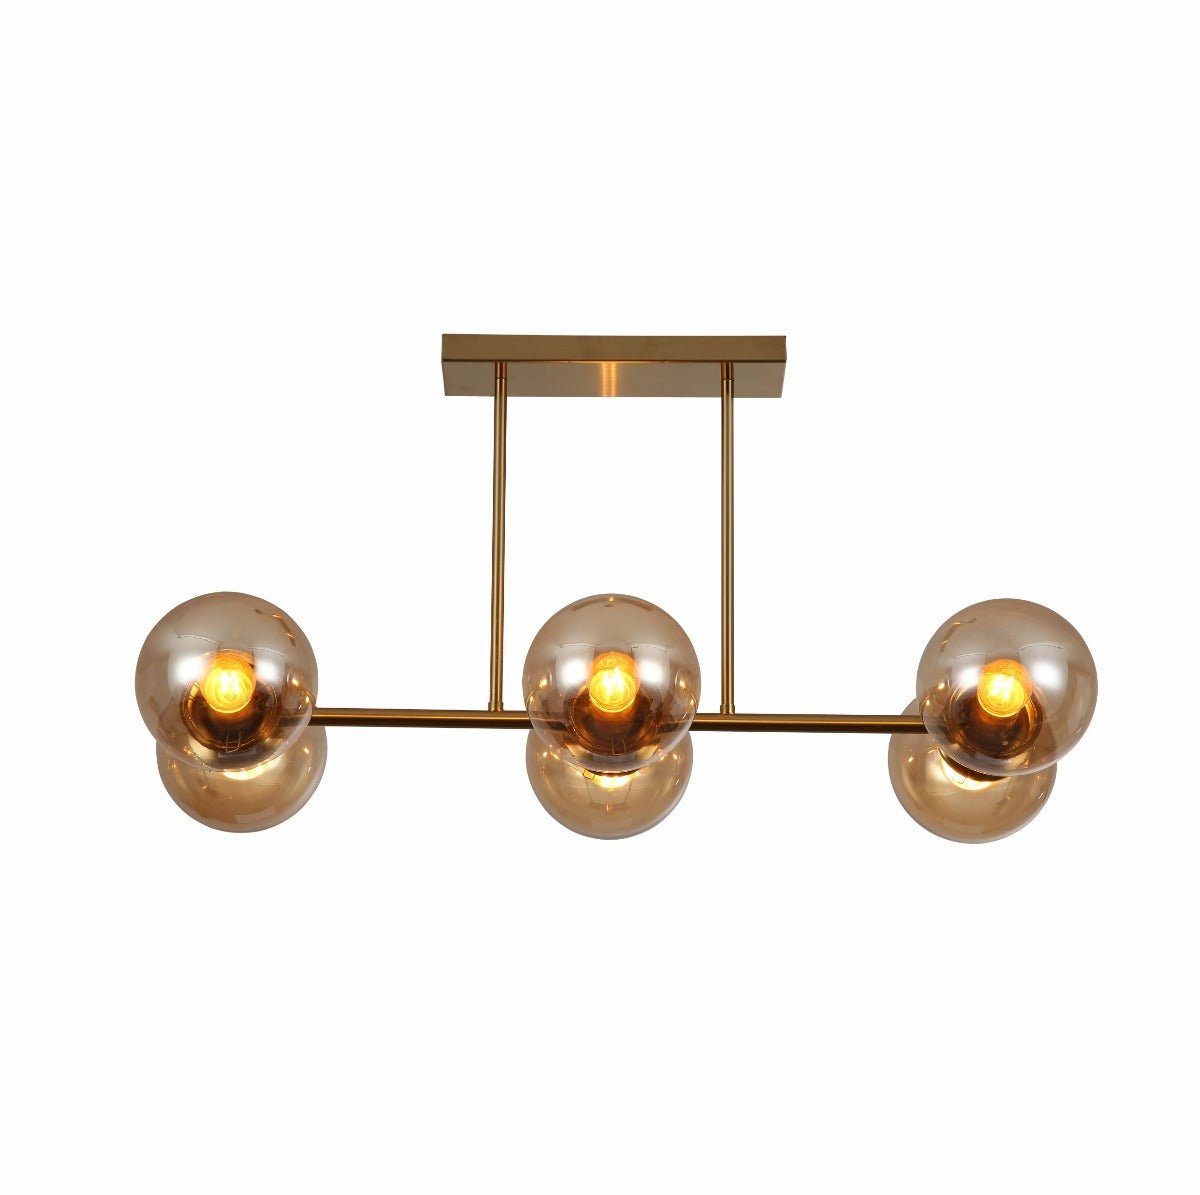 Main image of Amber Globe Glass Gold Metal Body Ceiling Light with 6xE27 Fitting | TEKLED 159-17576